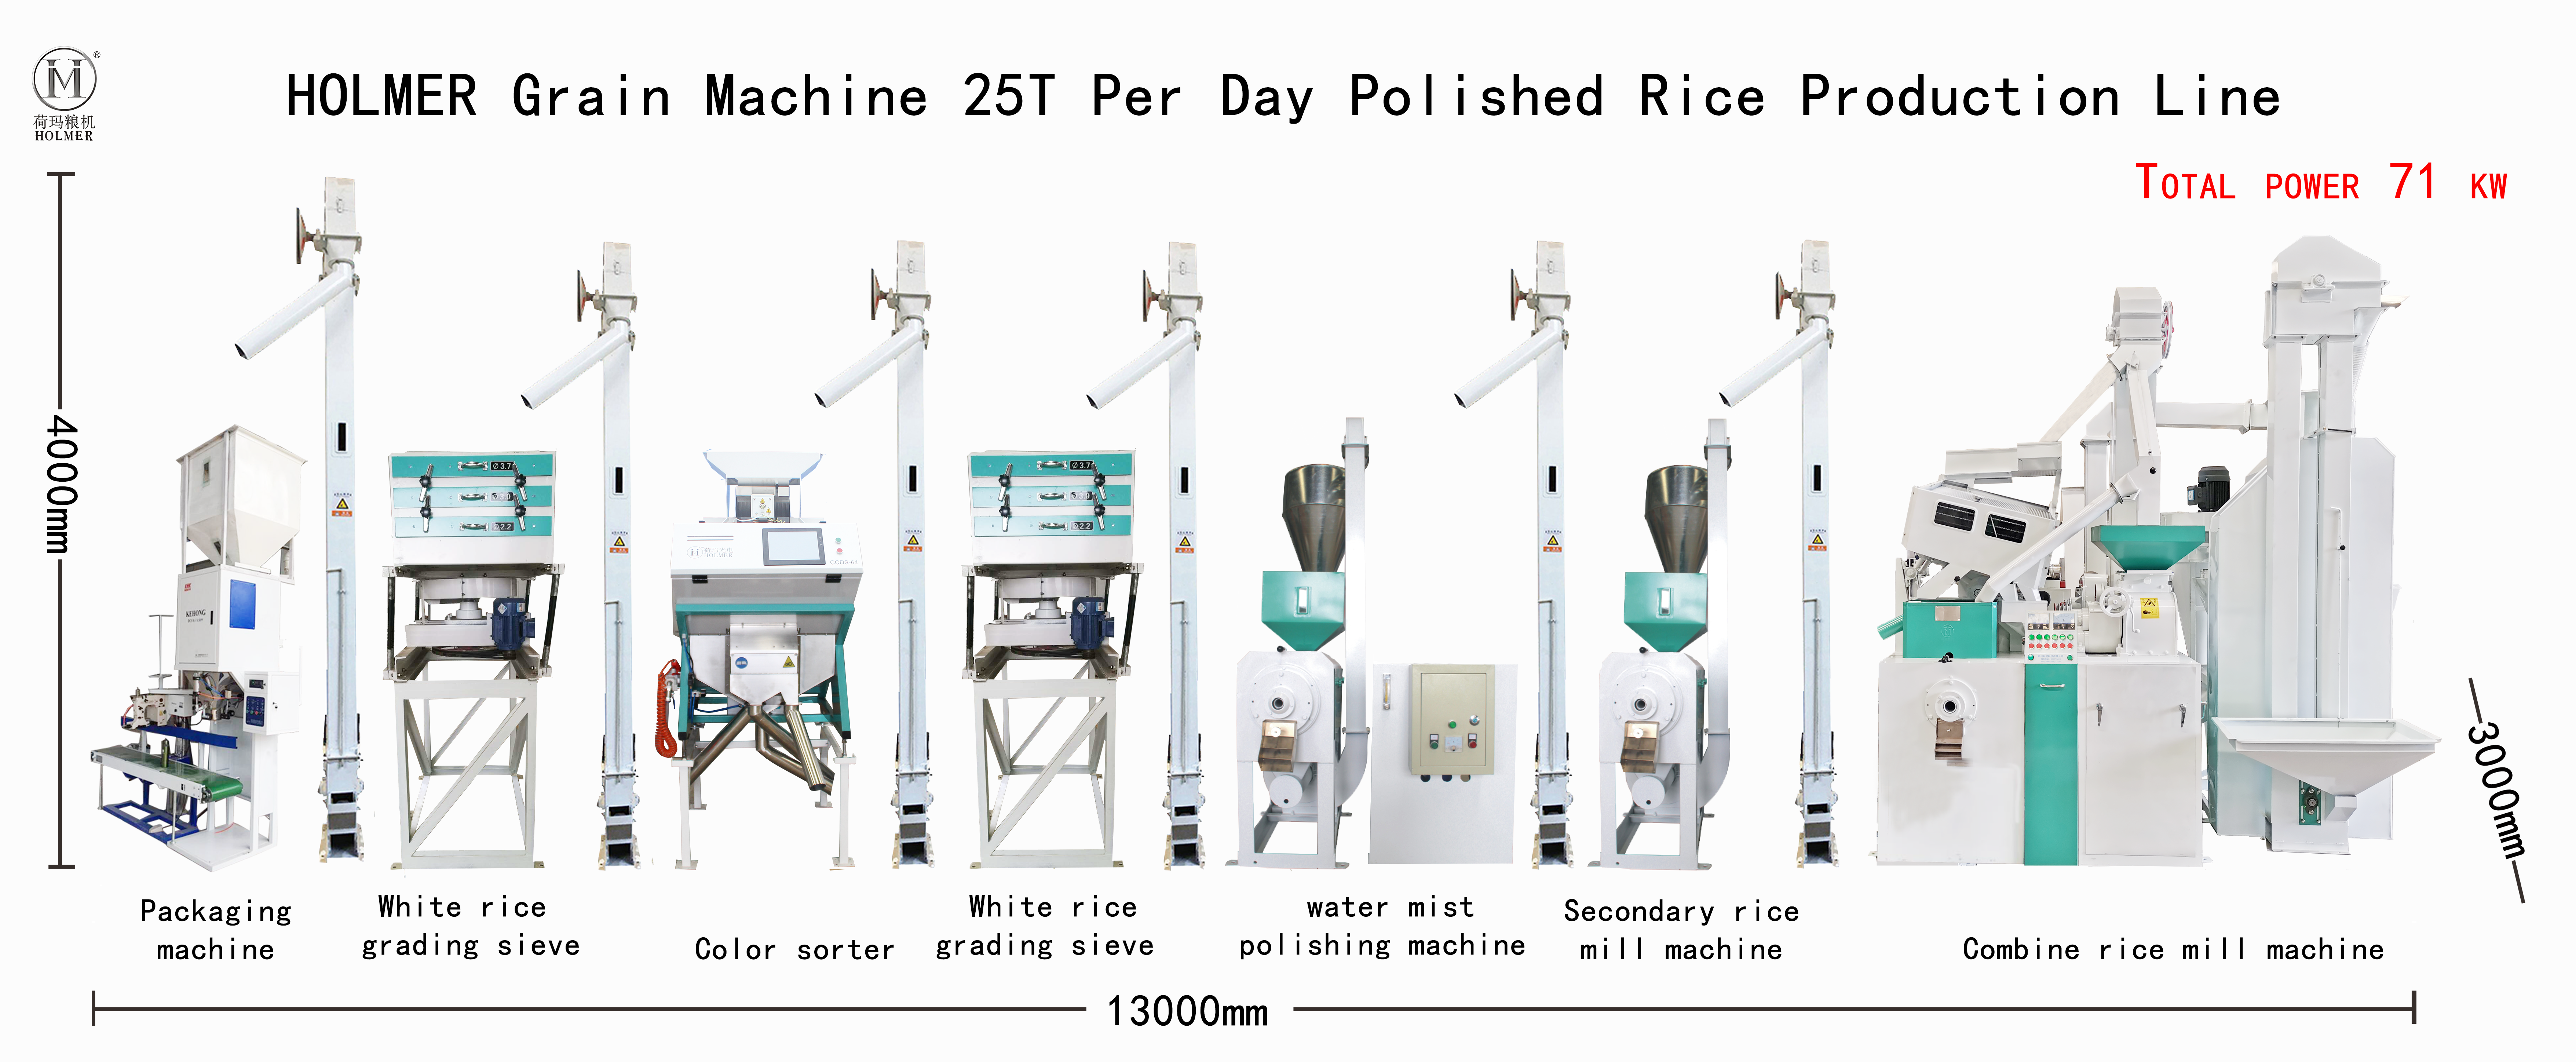 A Feature on the Holmer rice mill Machine